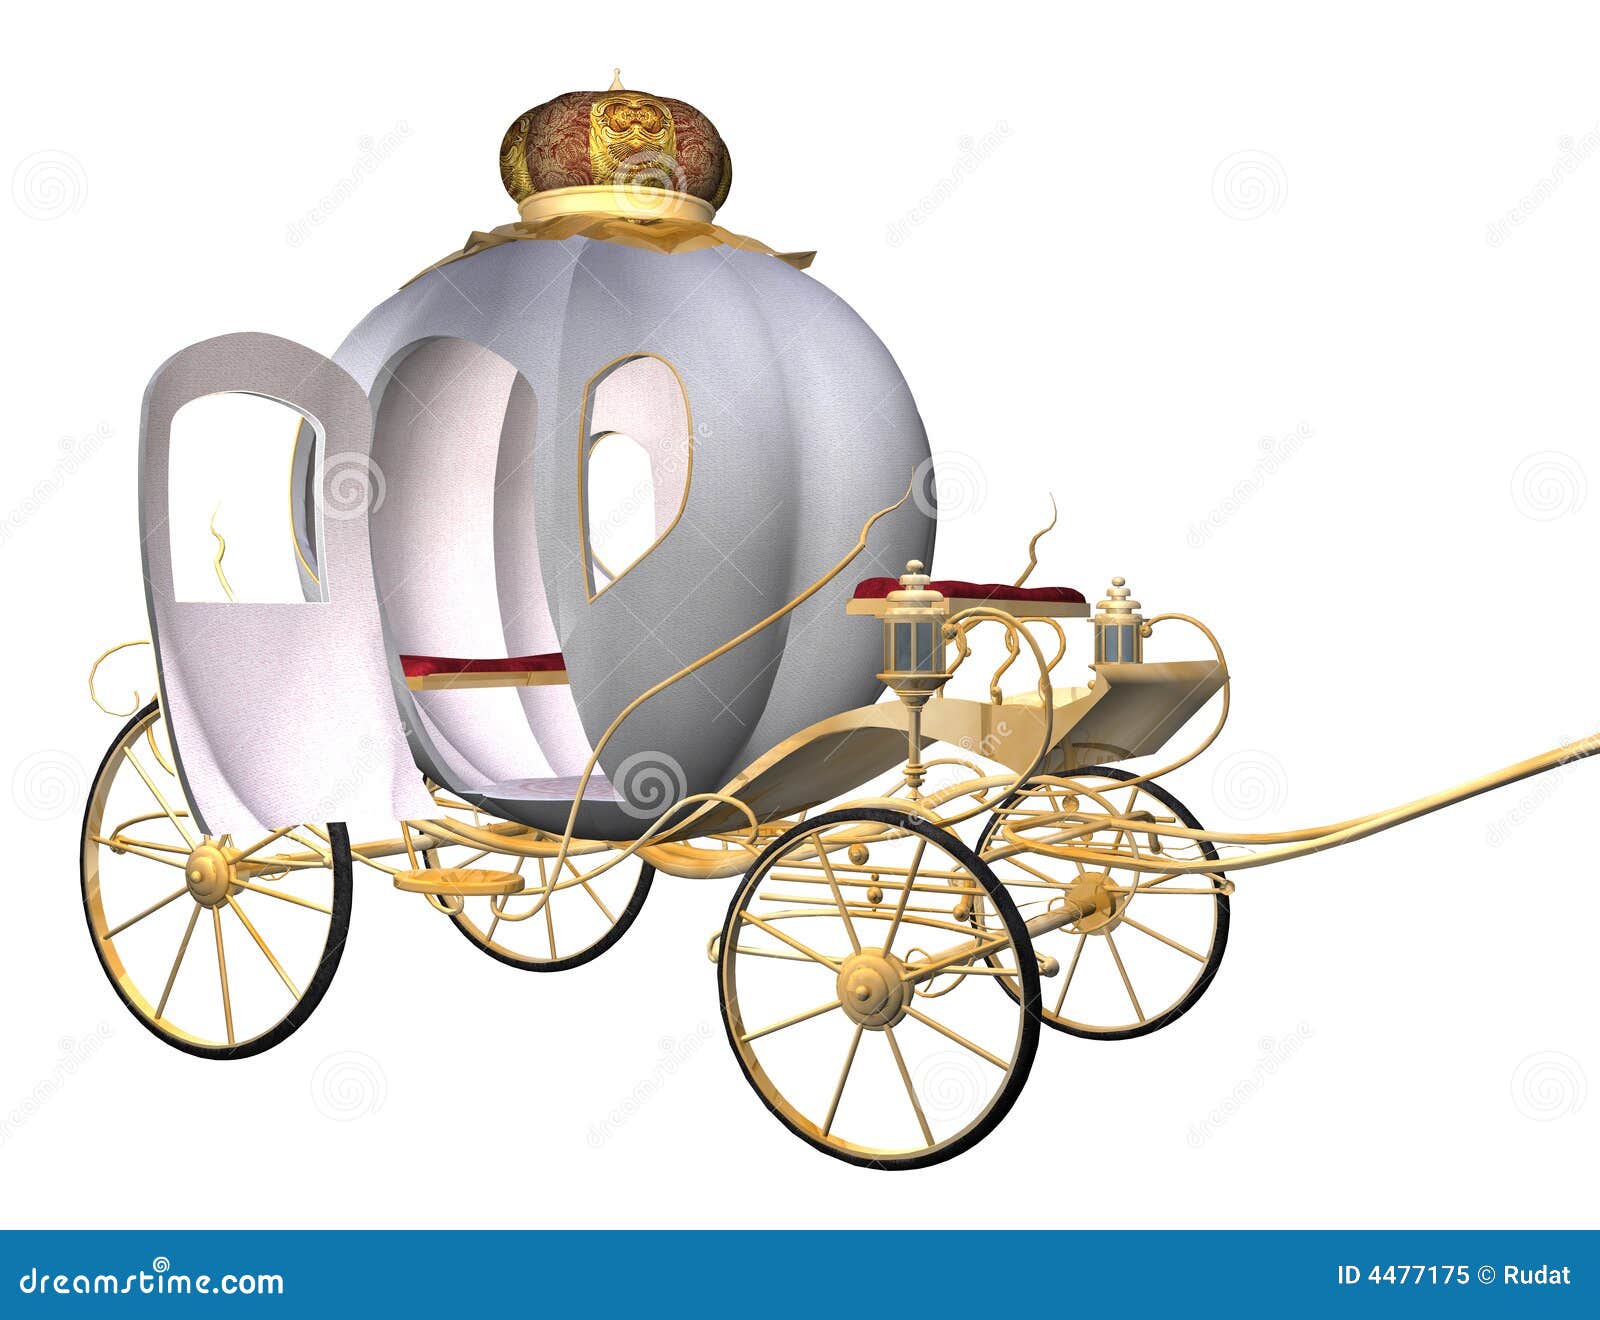 Cinderella's carriage stock illustration. Image of ball ...